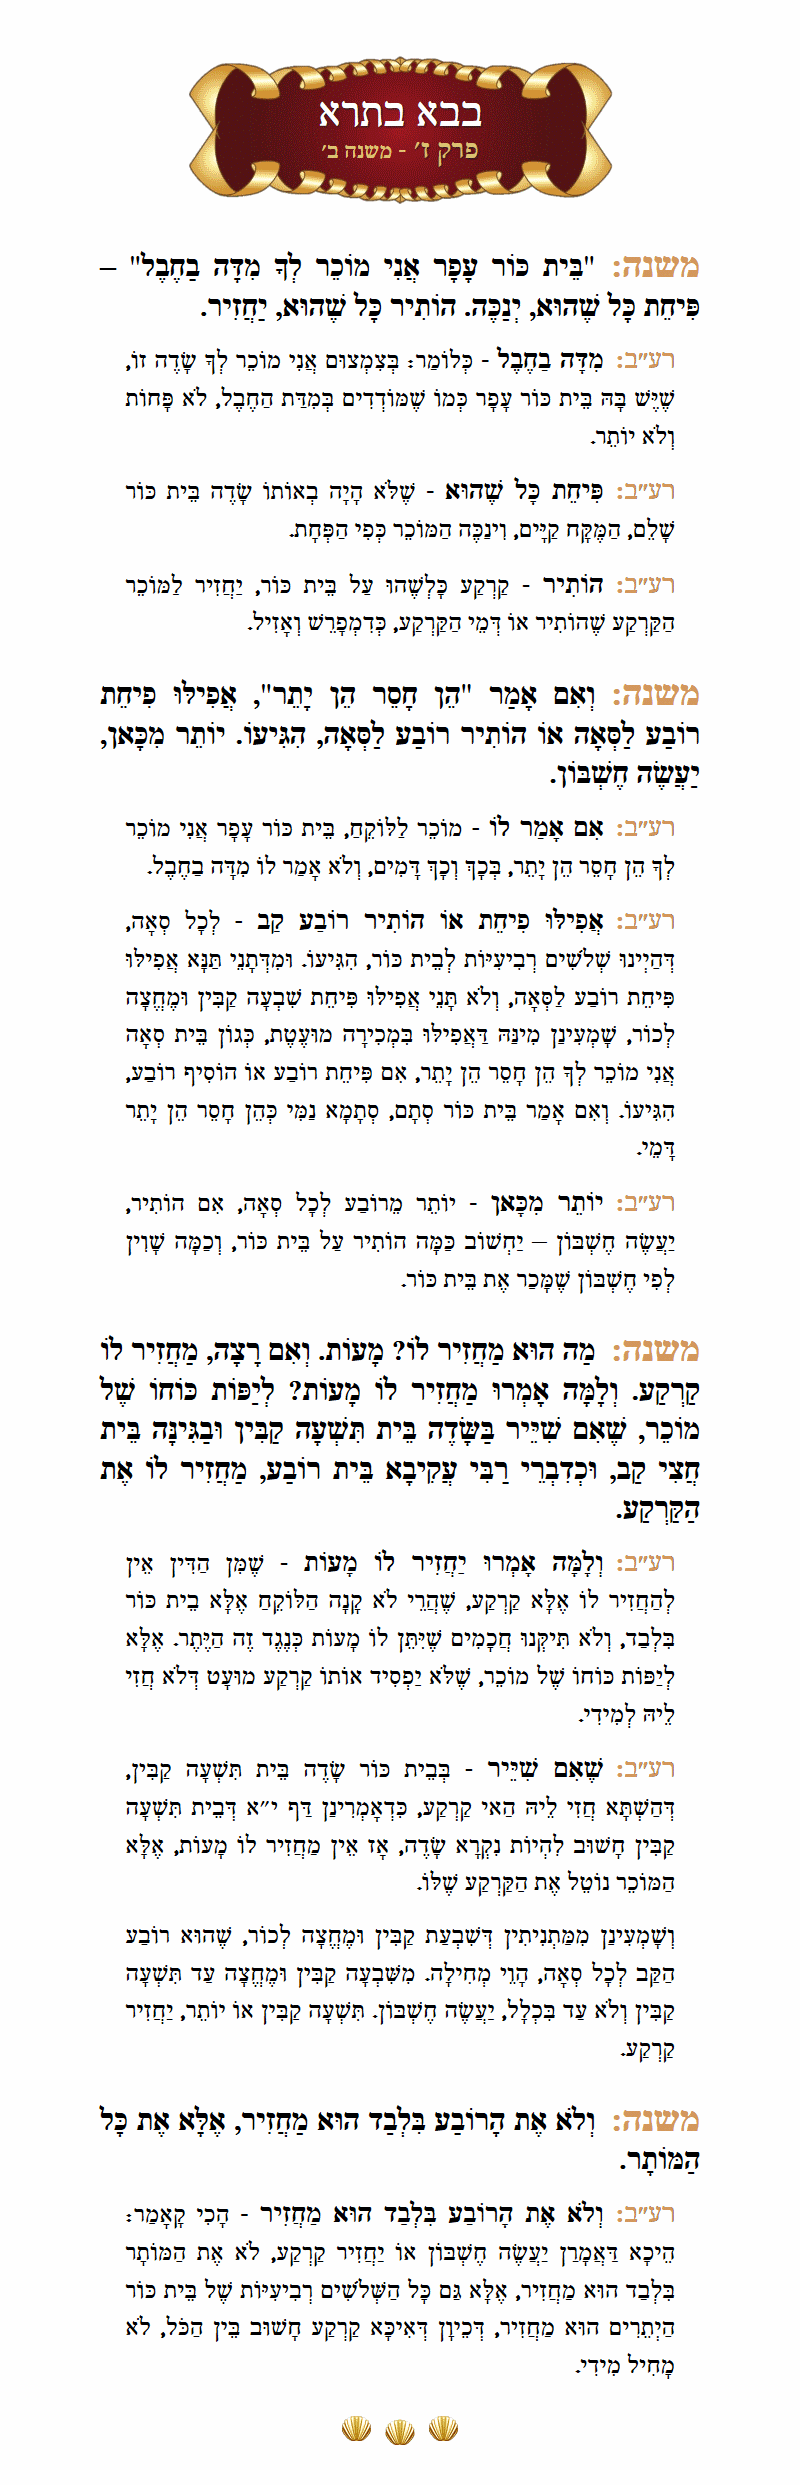 Masechta Bava Basra Chapter 7 Mishnah 2 with commentary